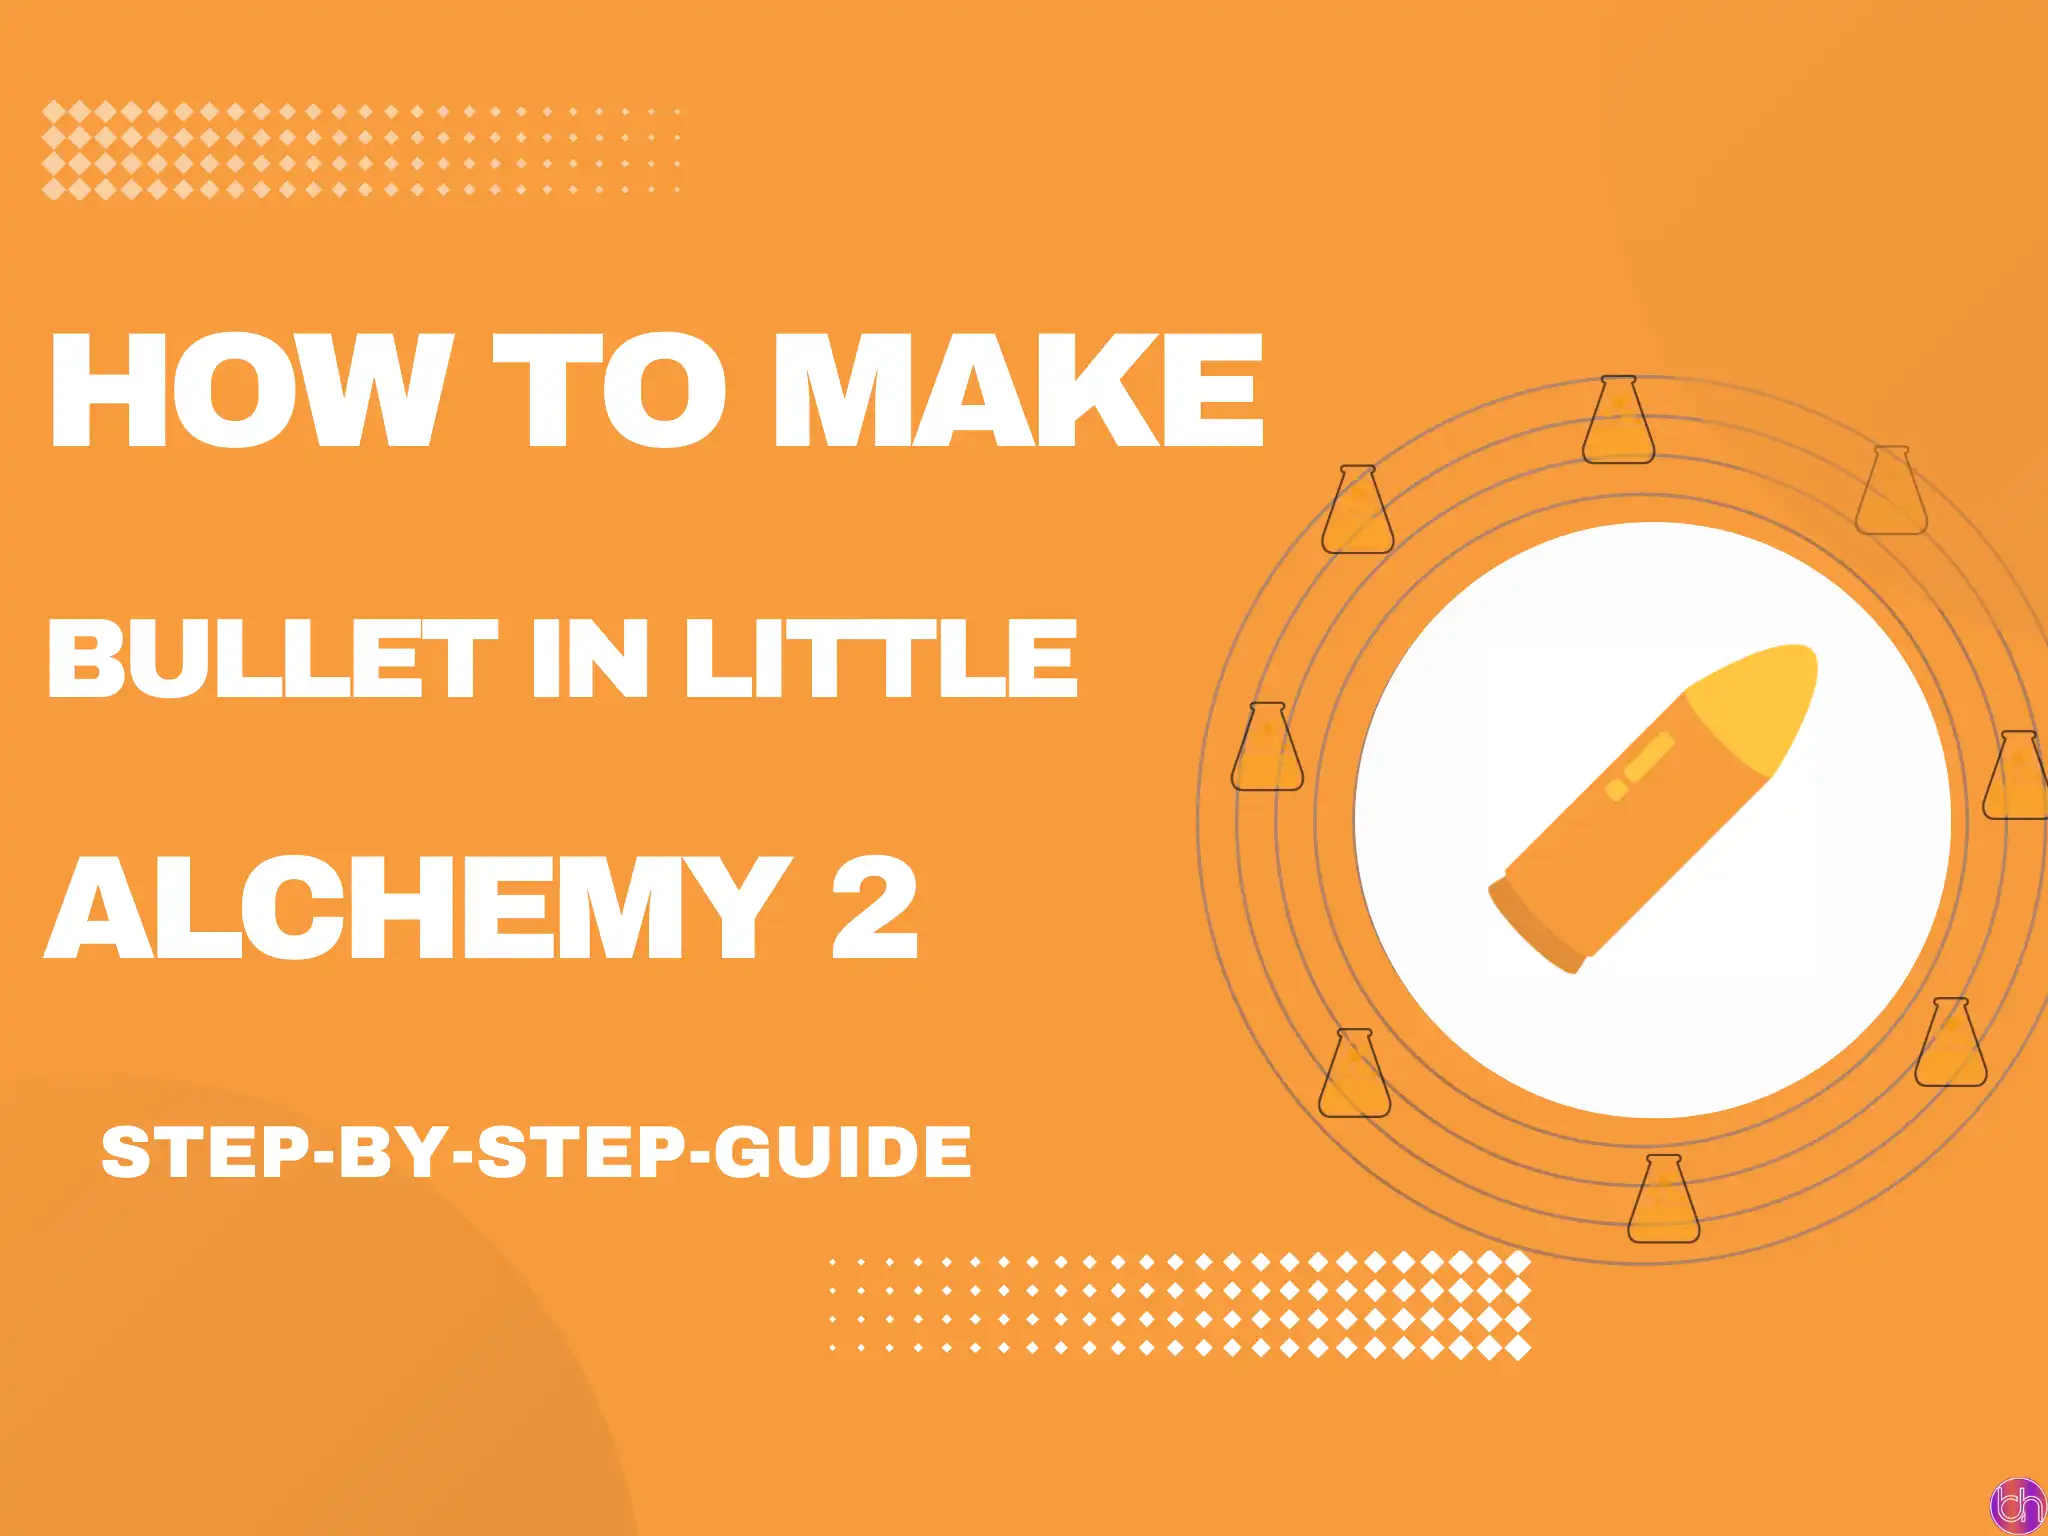 How to make Bullet in Little Alchemy 2